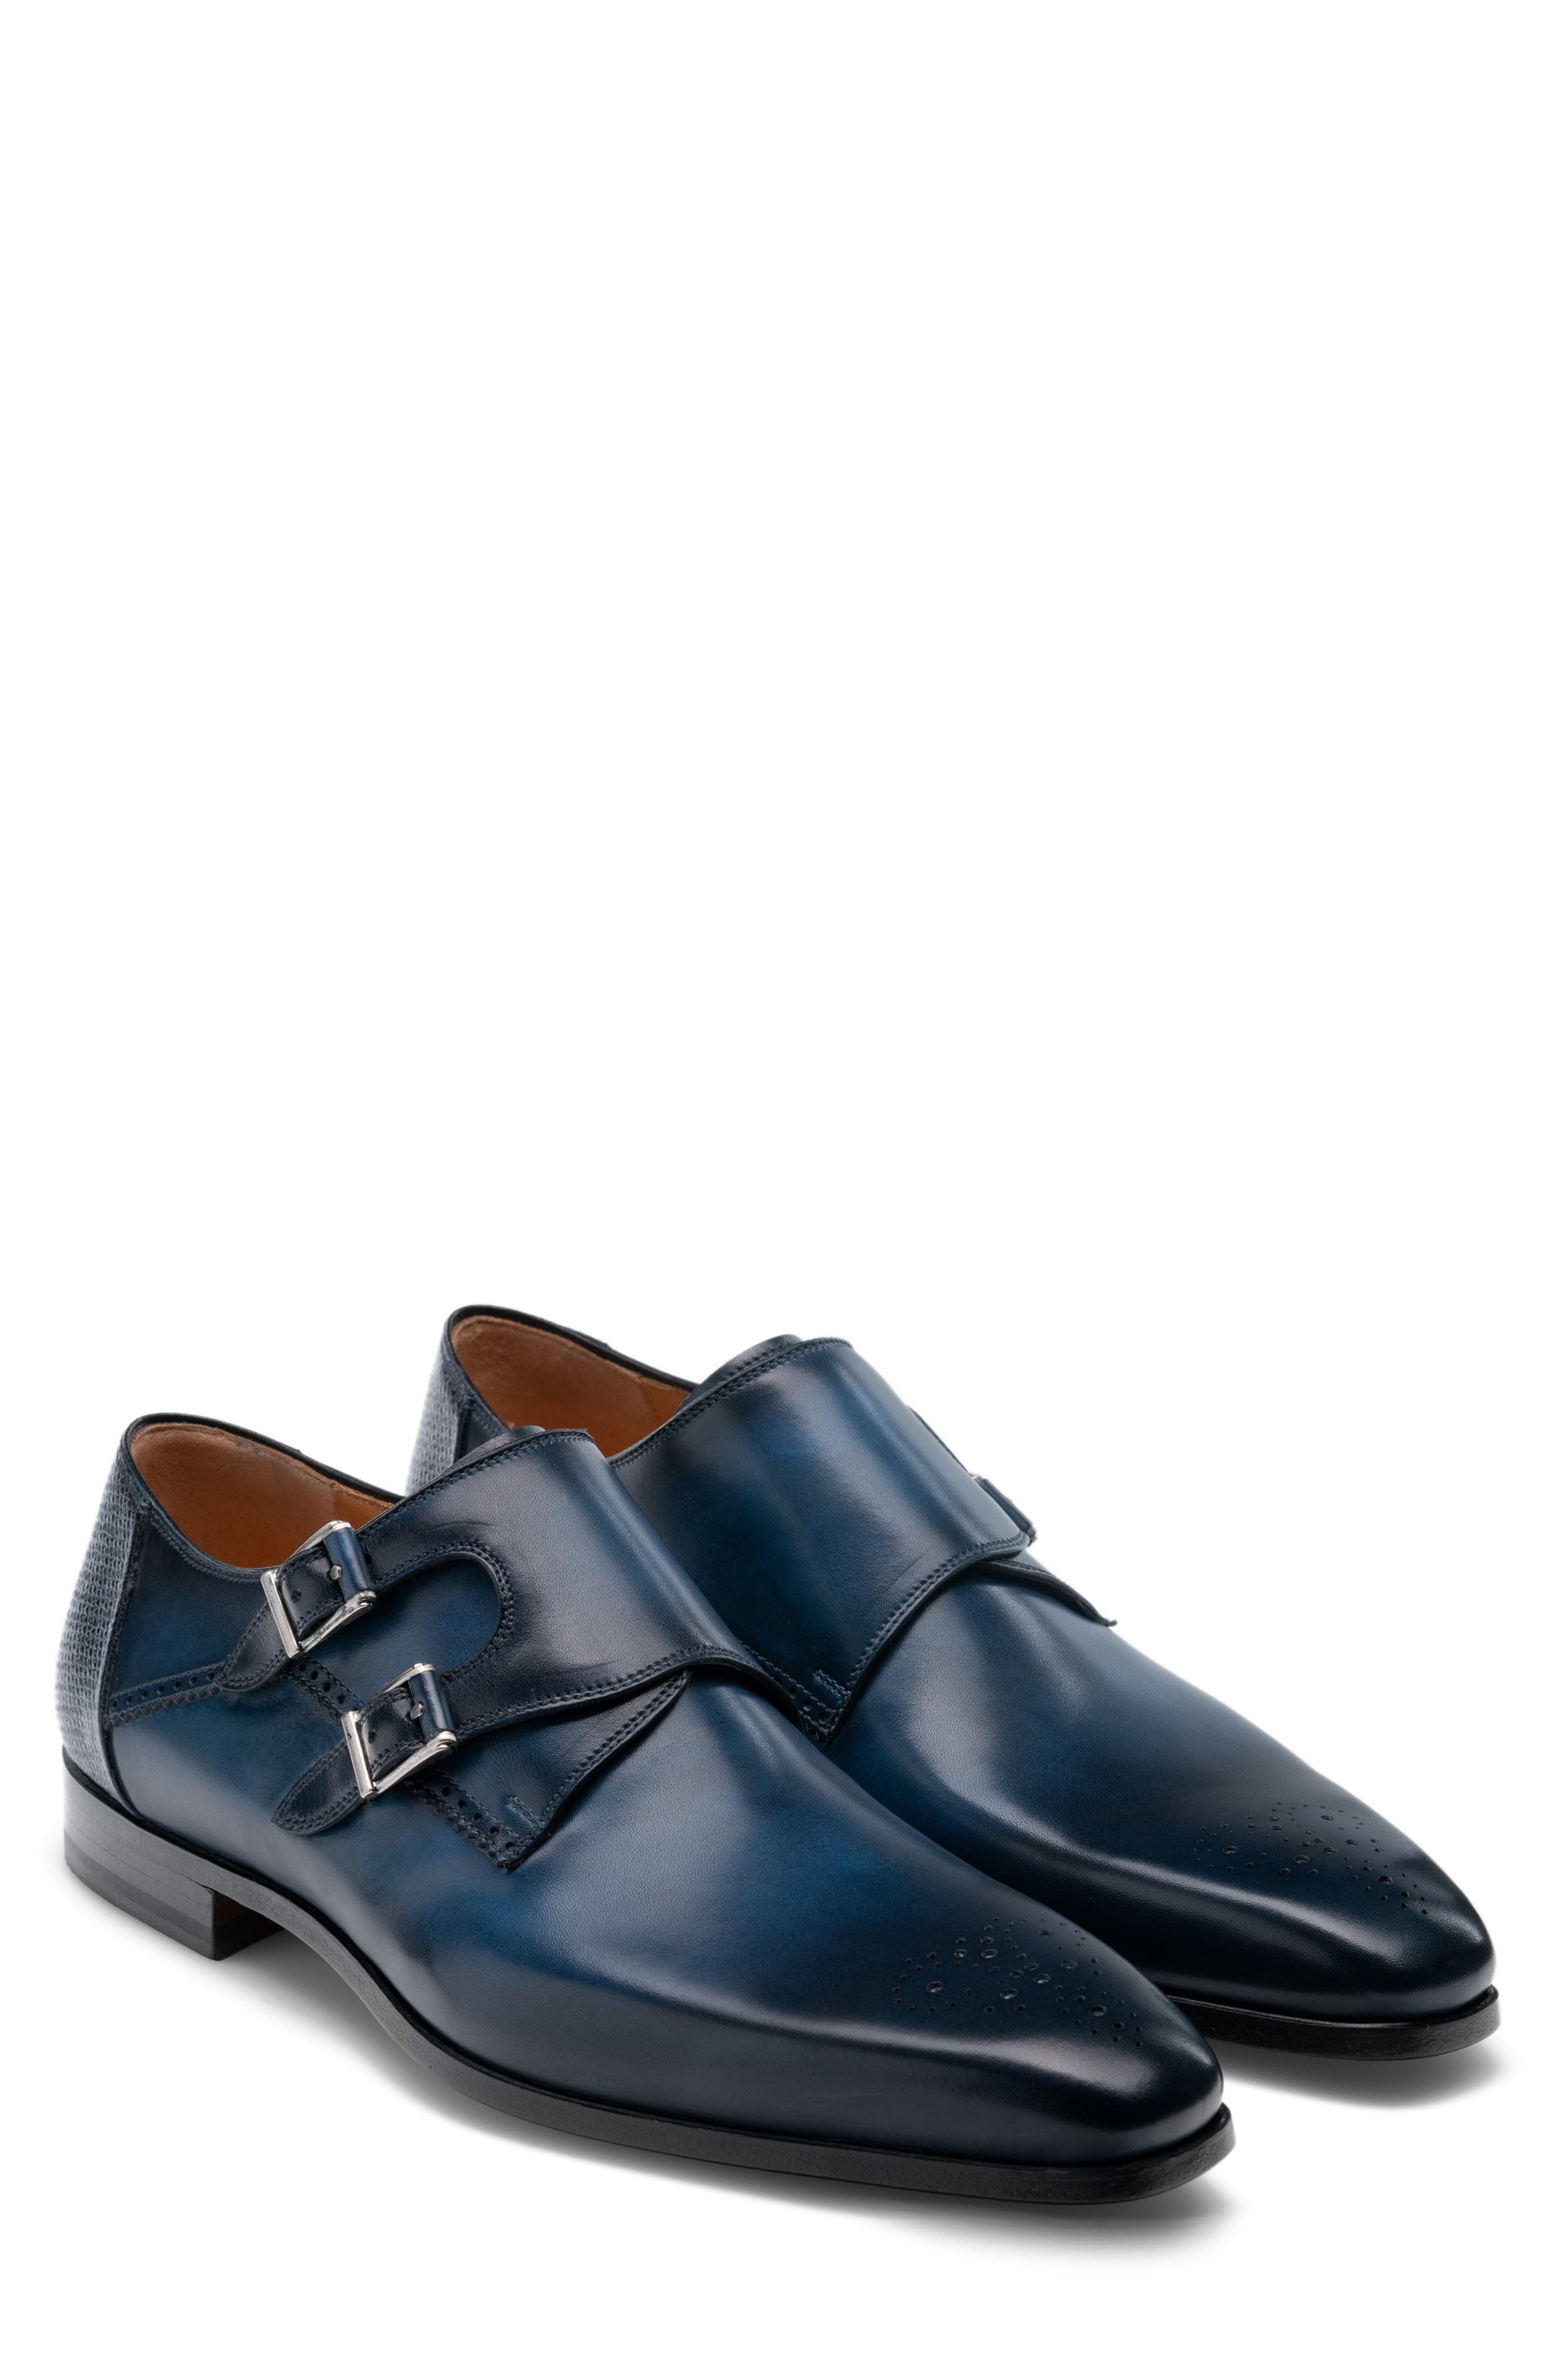 magnanni shoes clearance